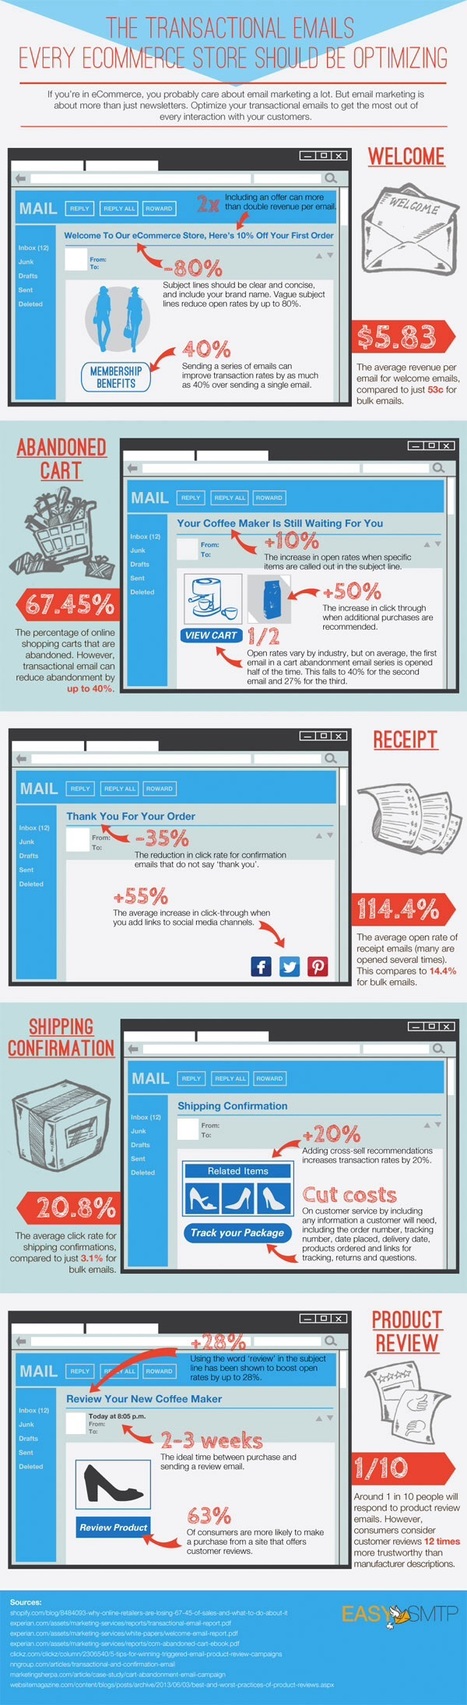 Optimizing Email Through The Customer Journey [Infographic] | E-Learning-Inclusivo (Mashup) | Scoop.it